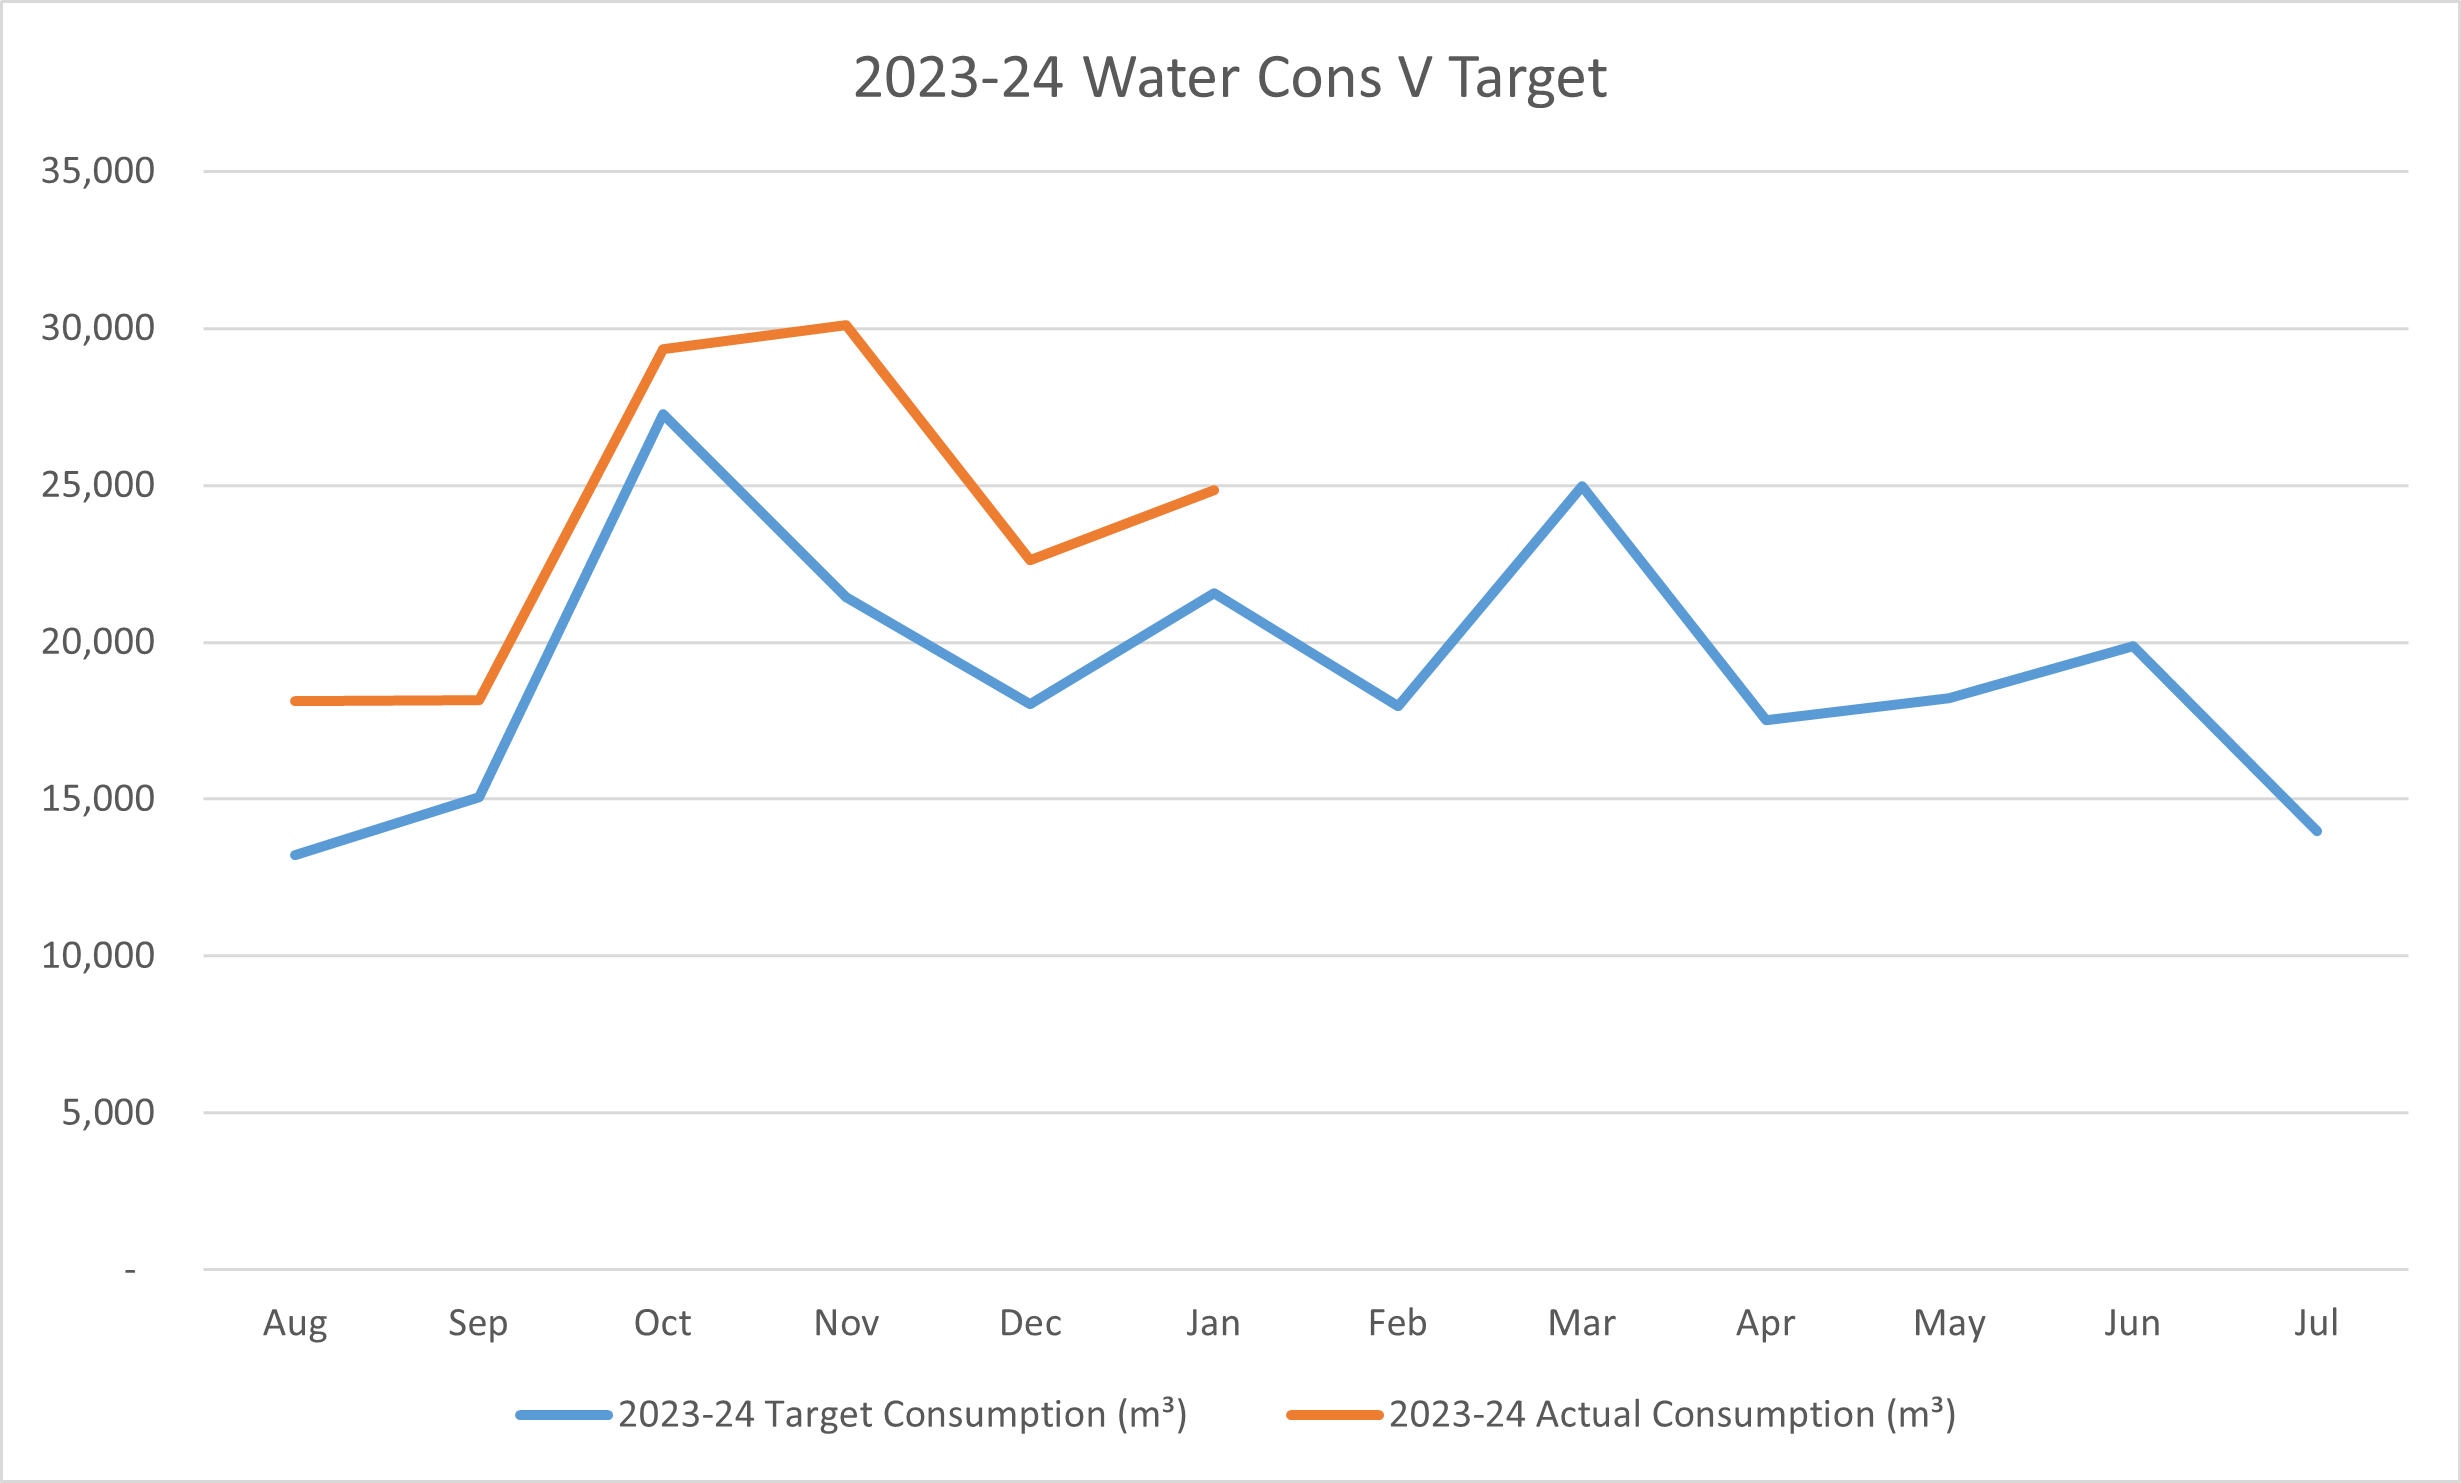 Water consumption 2023-24